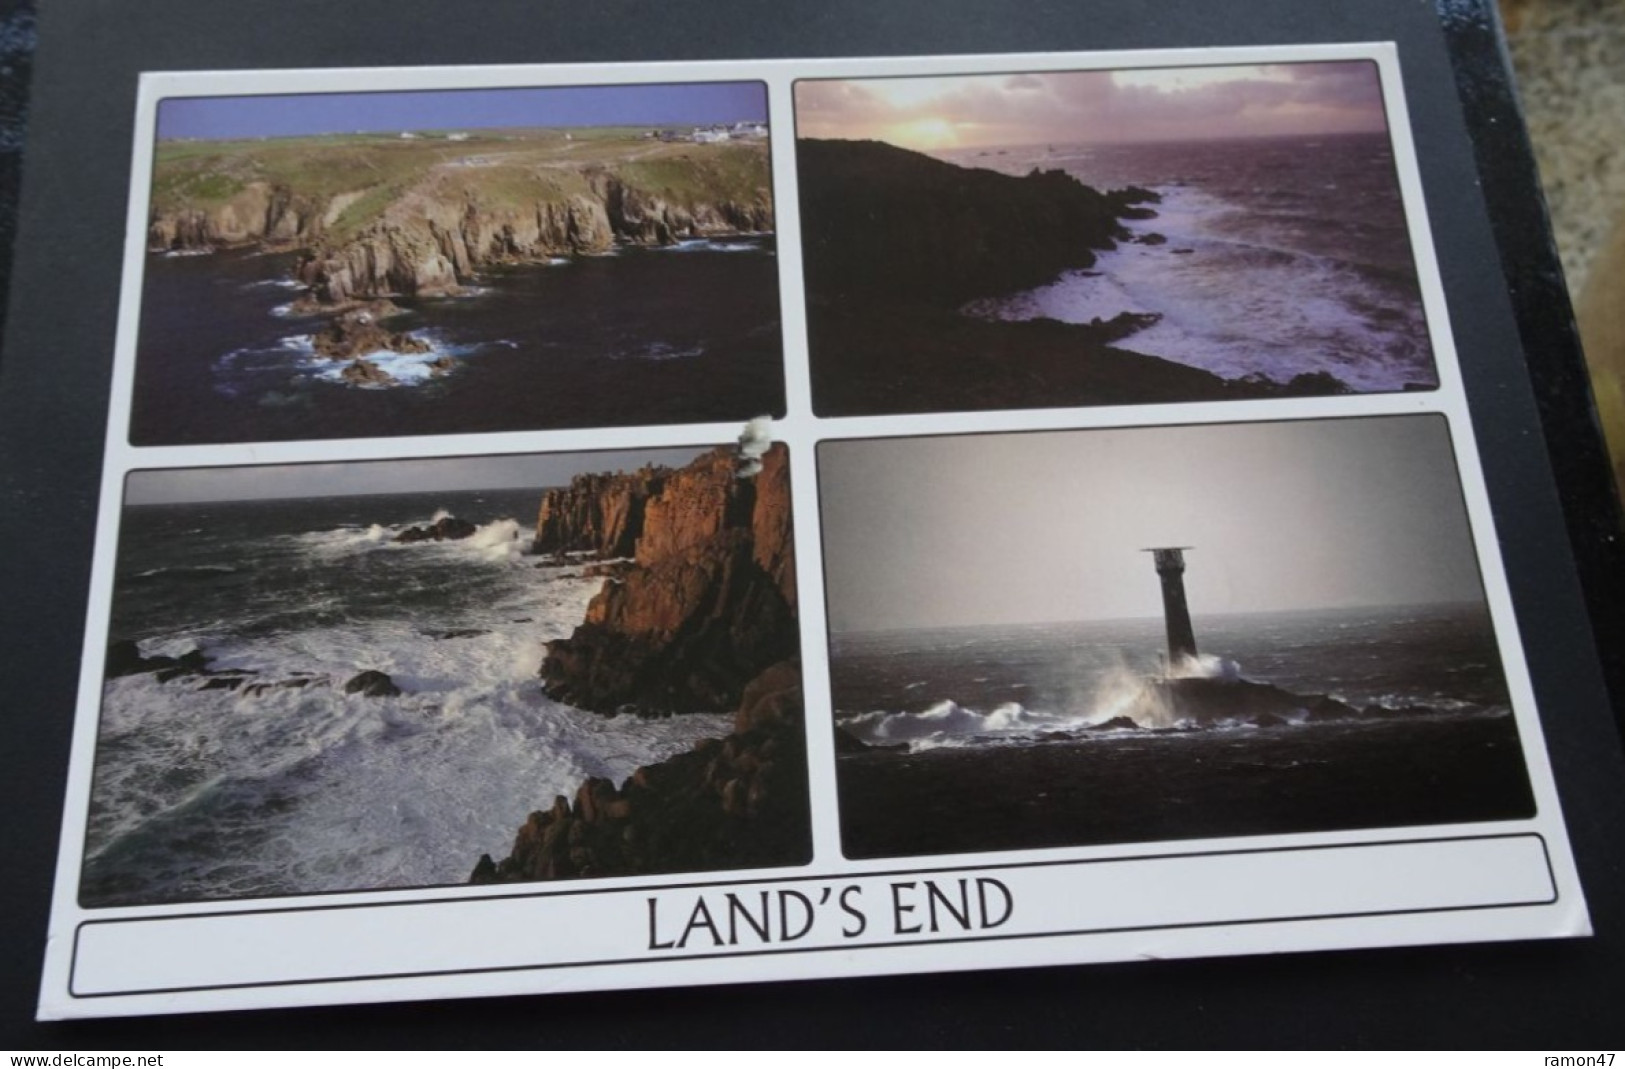 Cornwall - Land's End Moods - Viewed From The Air And From The Land.  Dramatic Cornish Scenery - Land's End